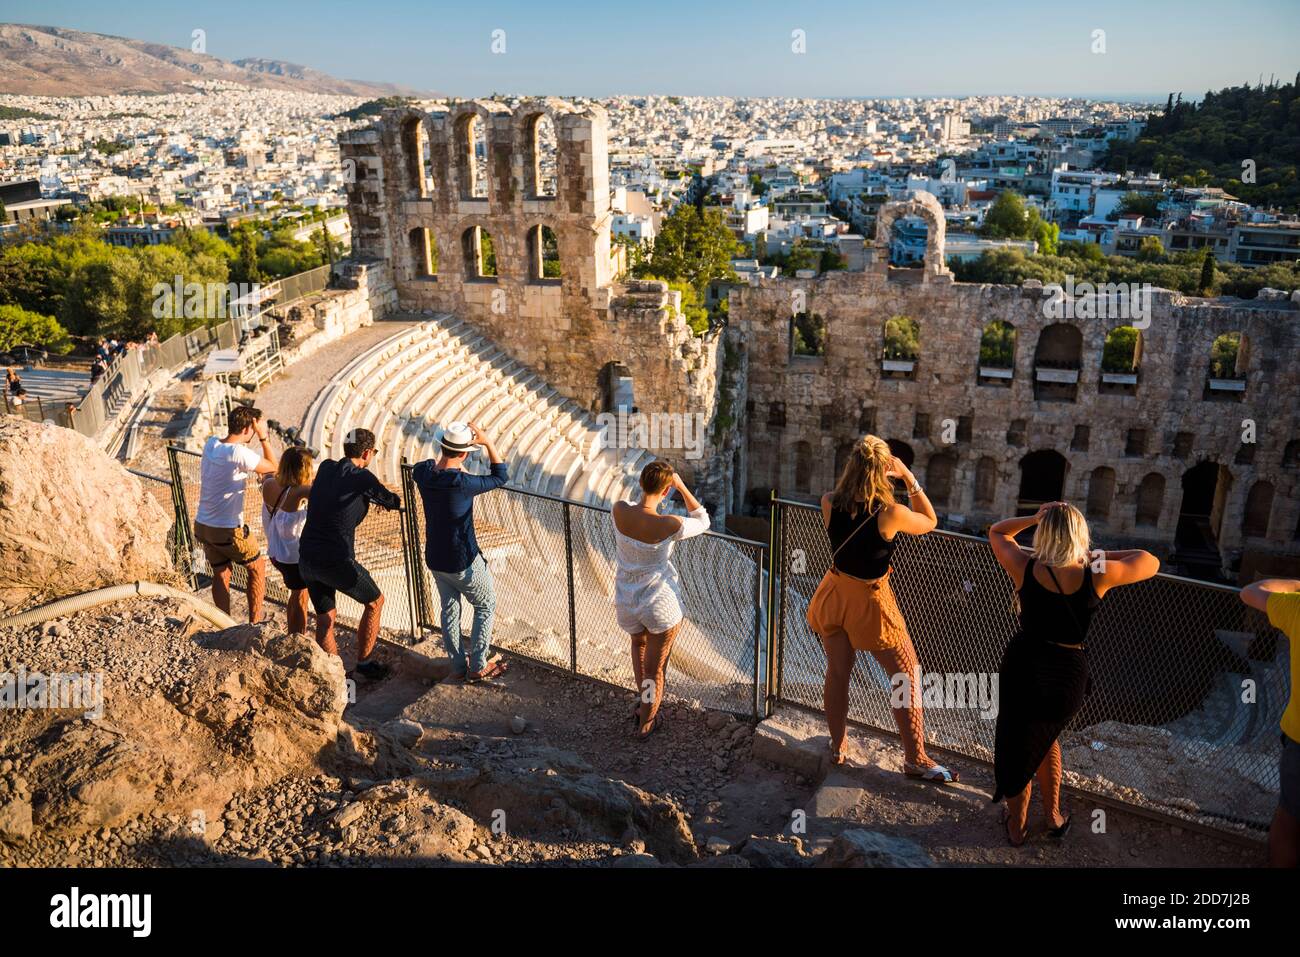 Tourists at Odeon of Herodes Atticus Theatre, by the Acropolis, Athens, Attica Region, Greece Stock Photo